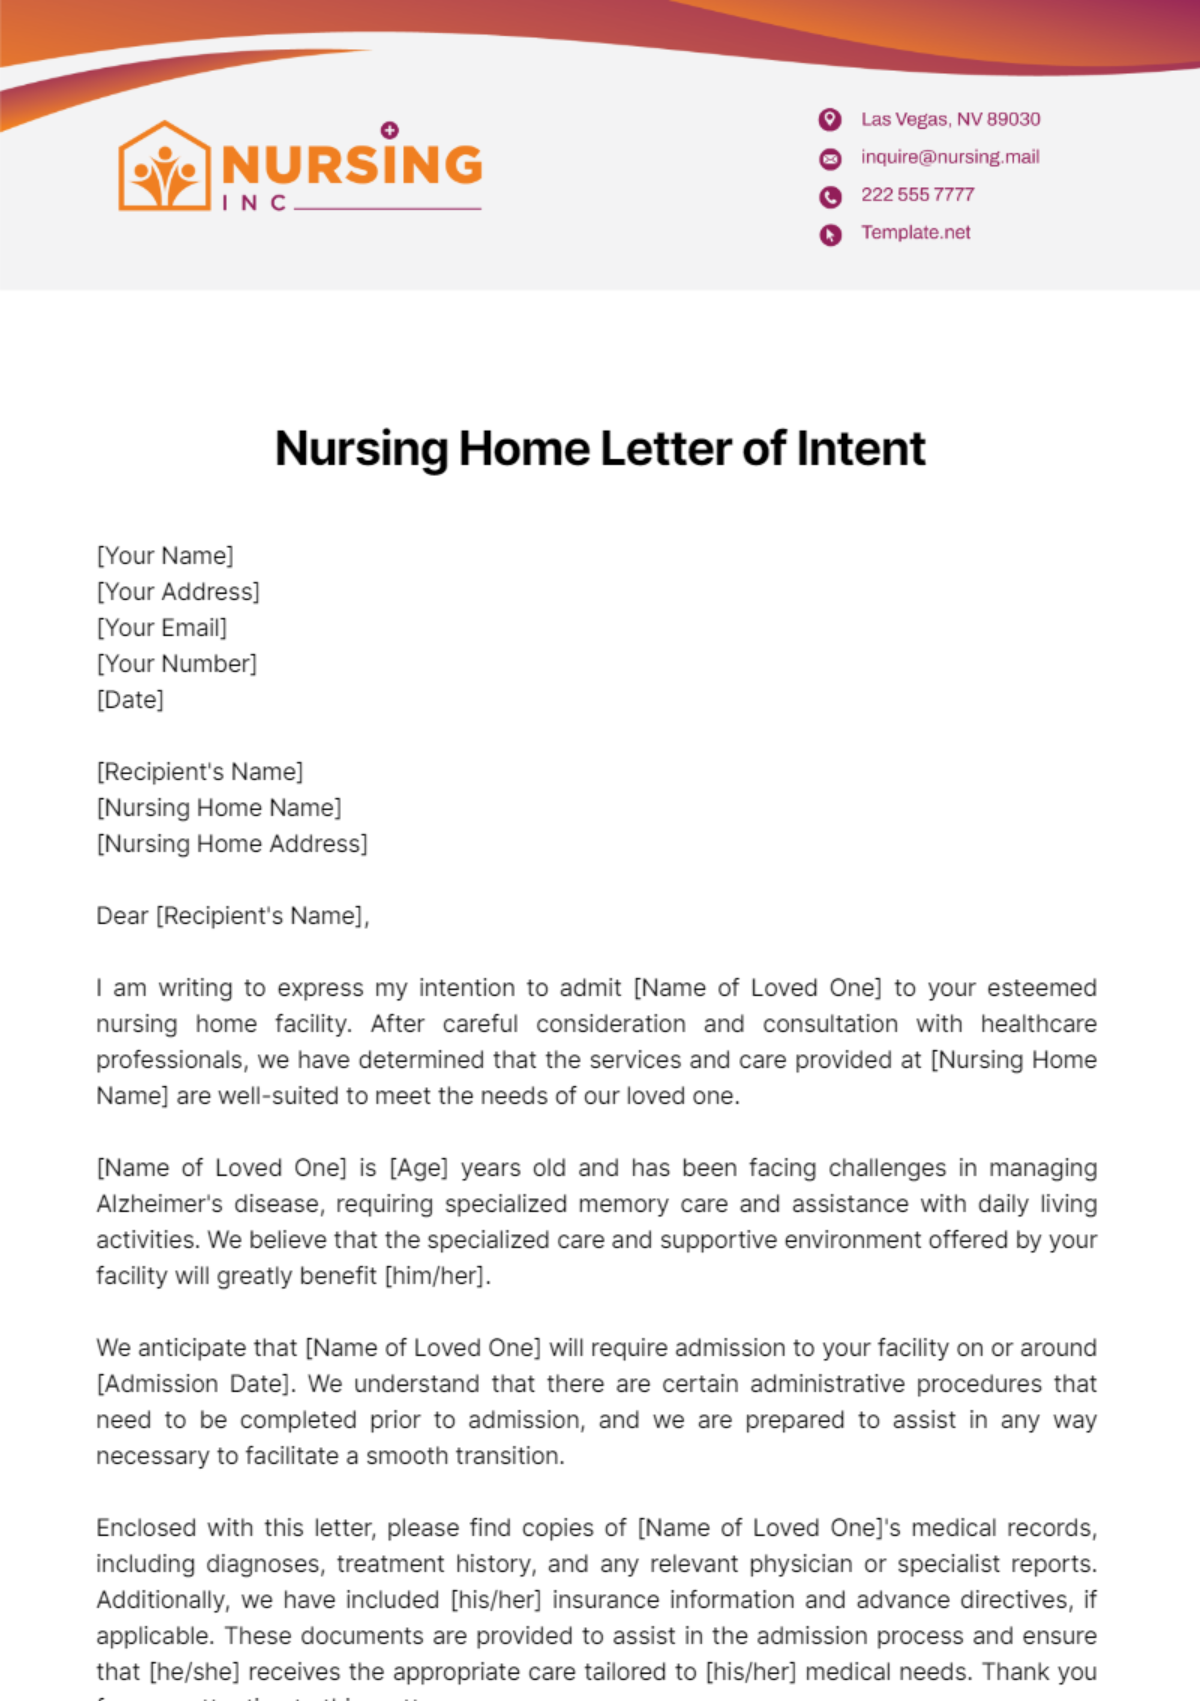 Nursing Home Letter of Intent Template